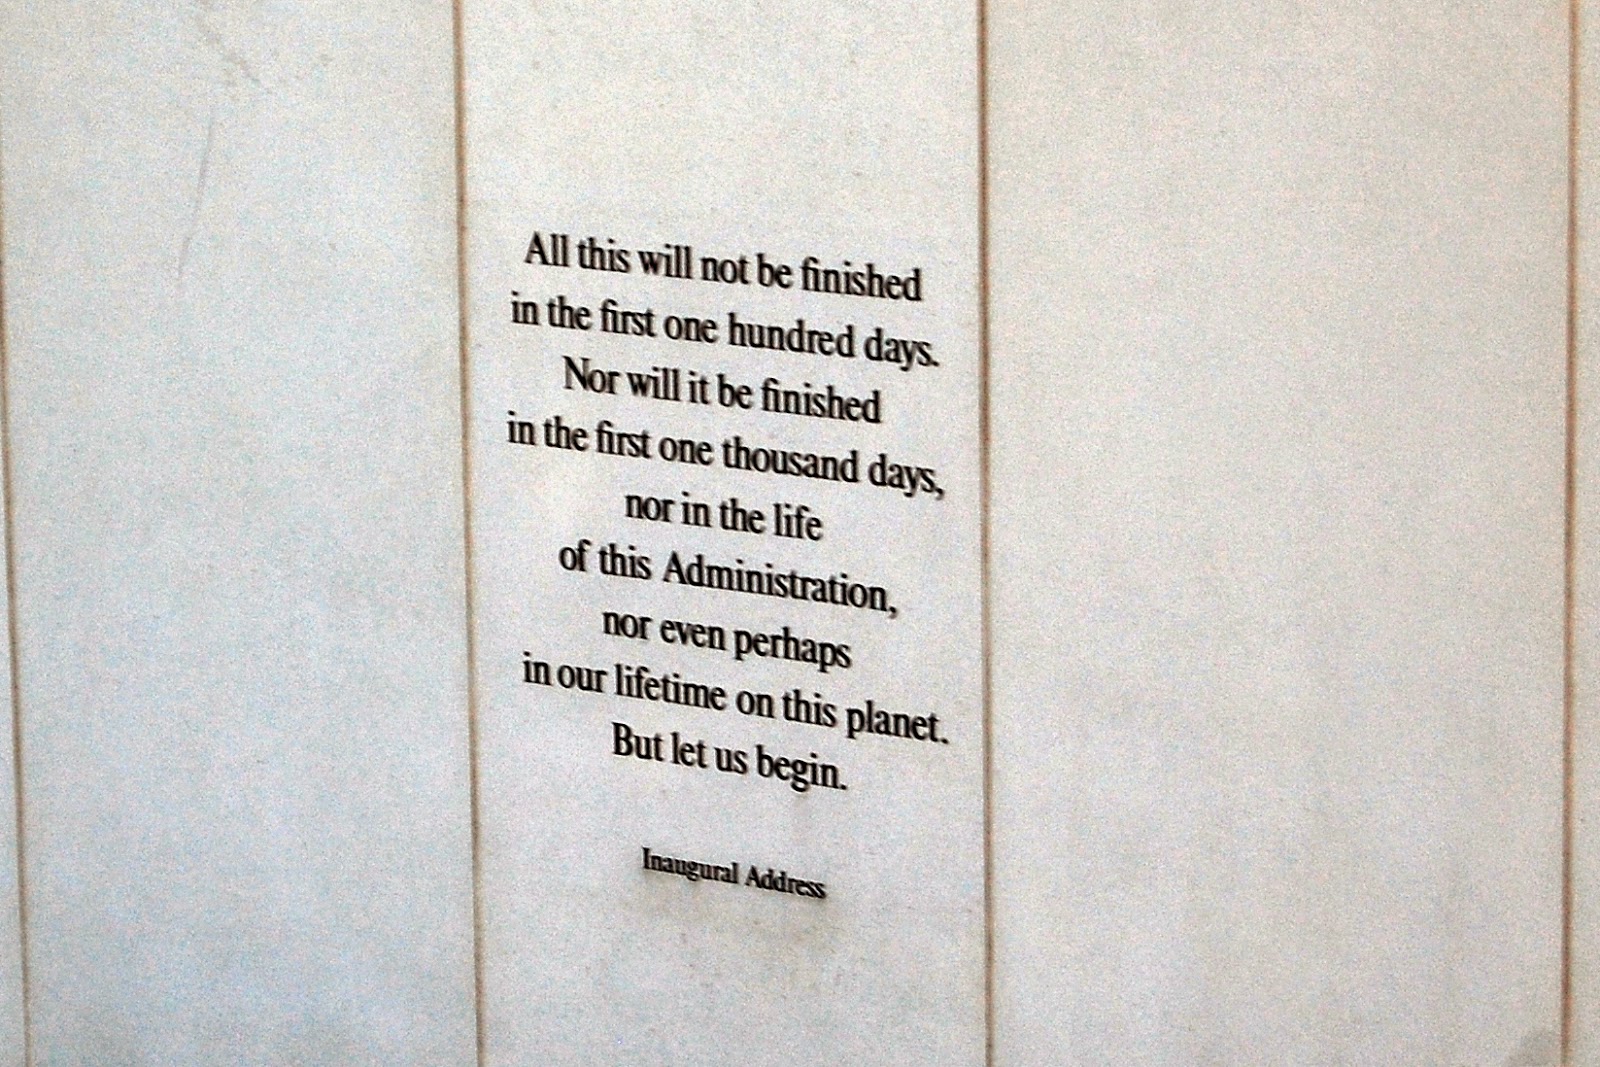 quote from President Kennedy's 1st Inaugural Address